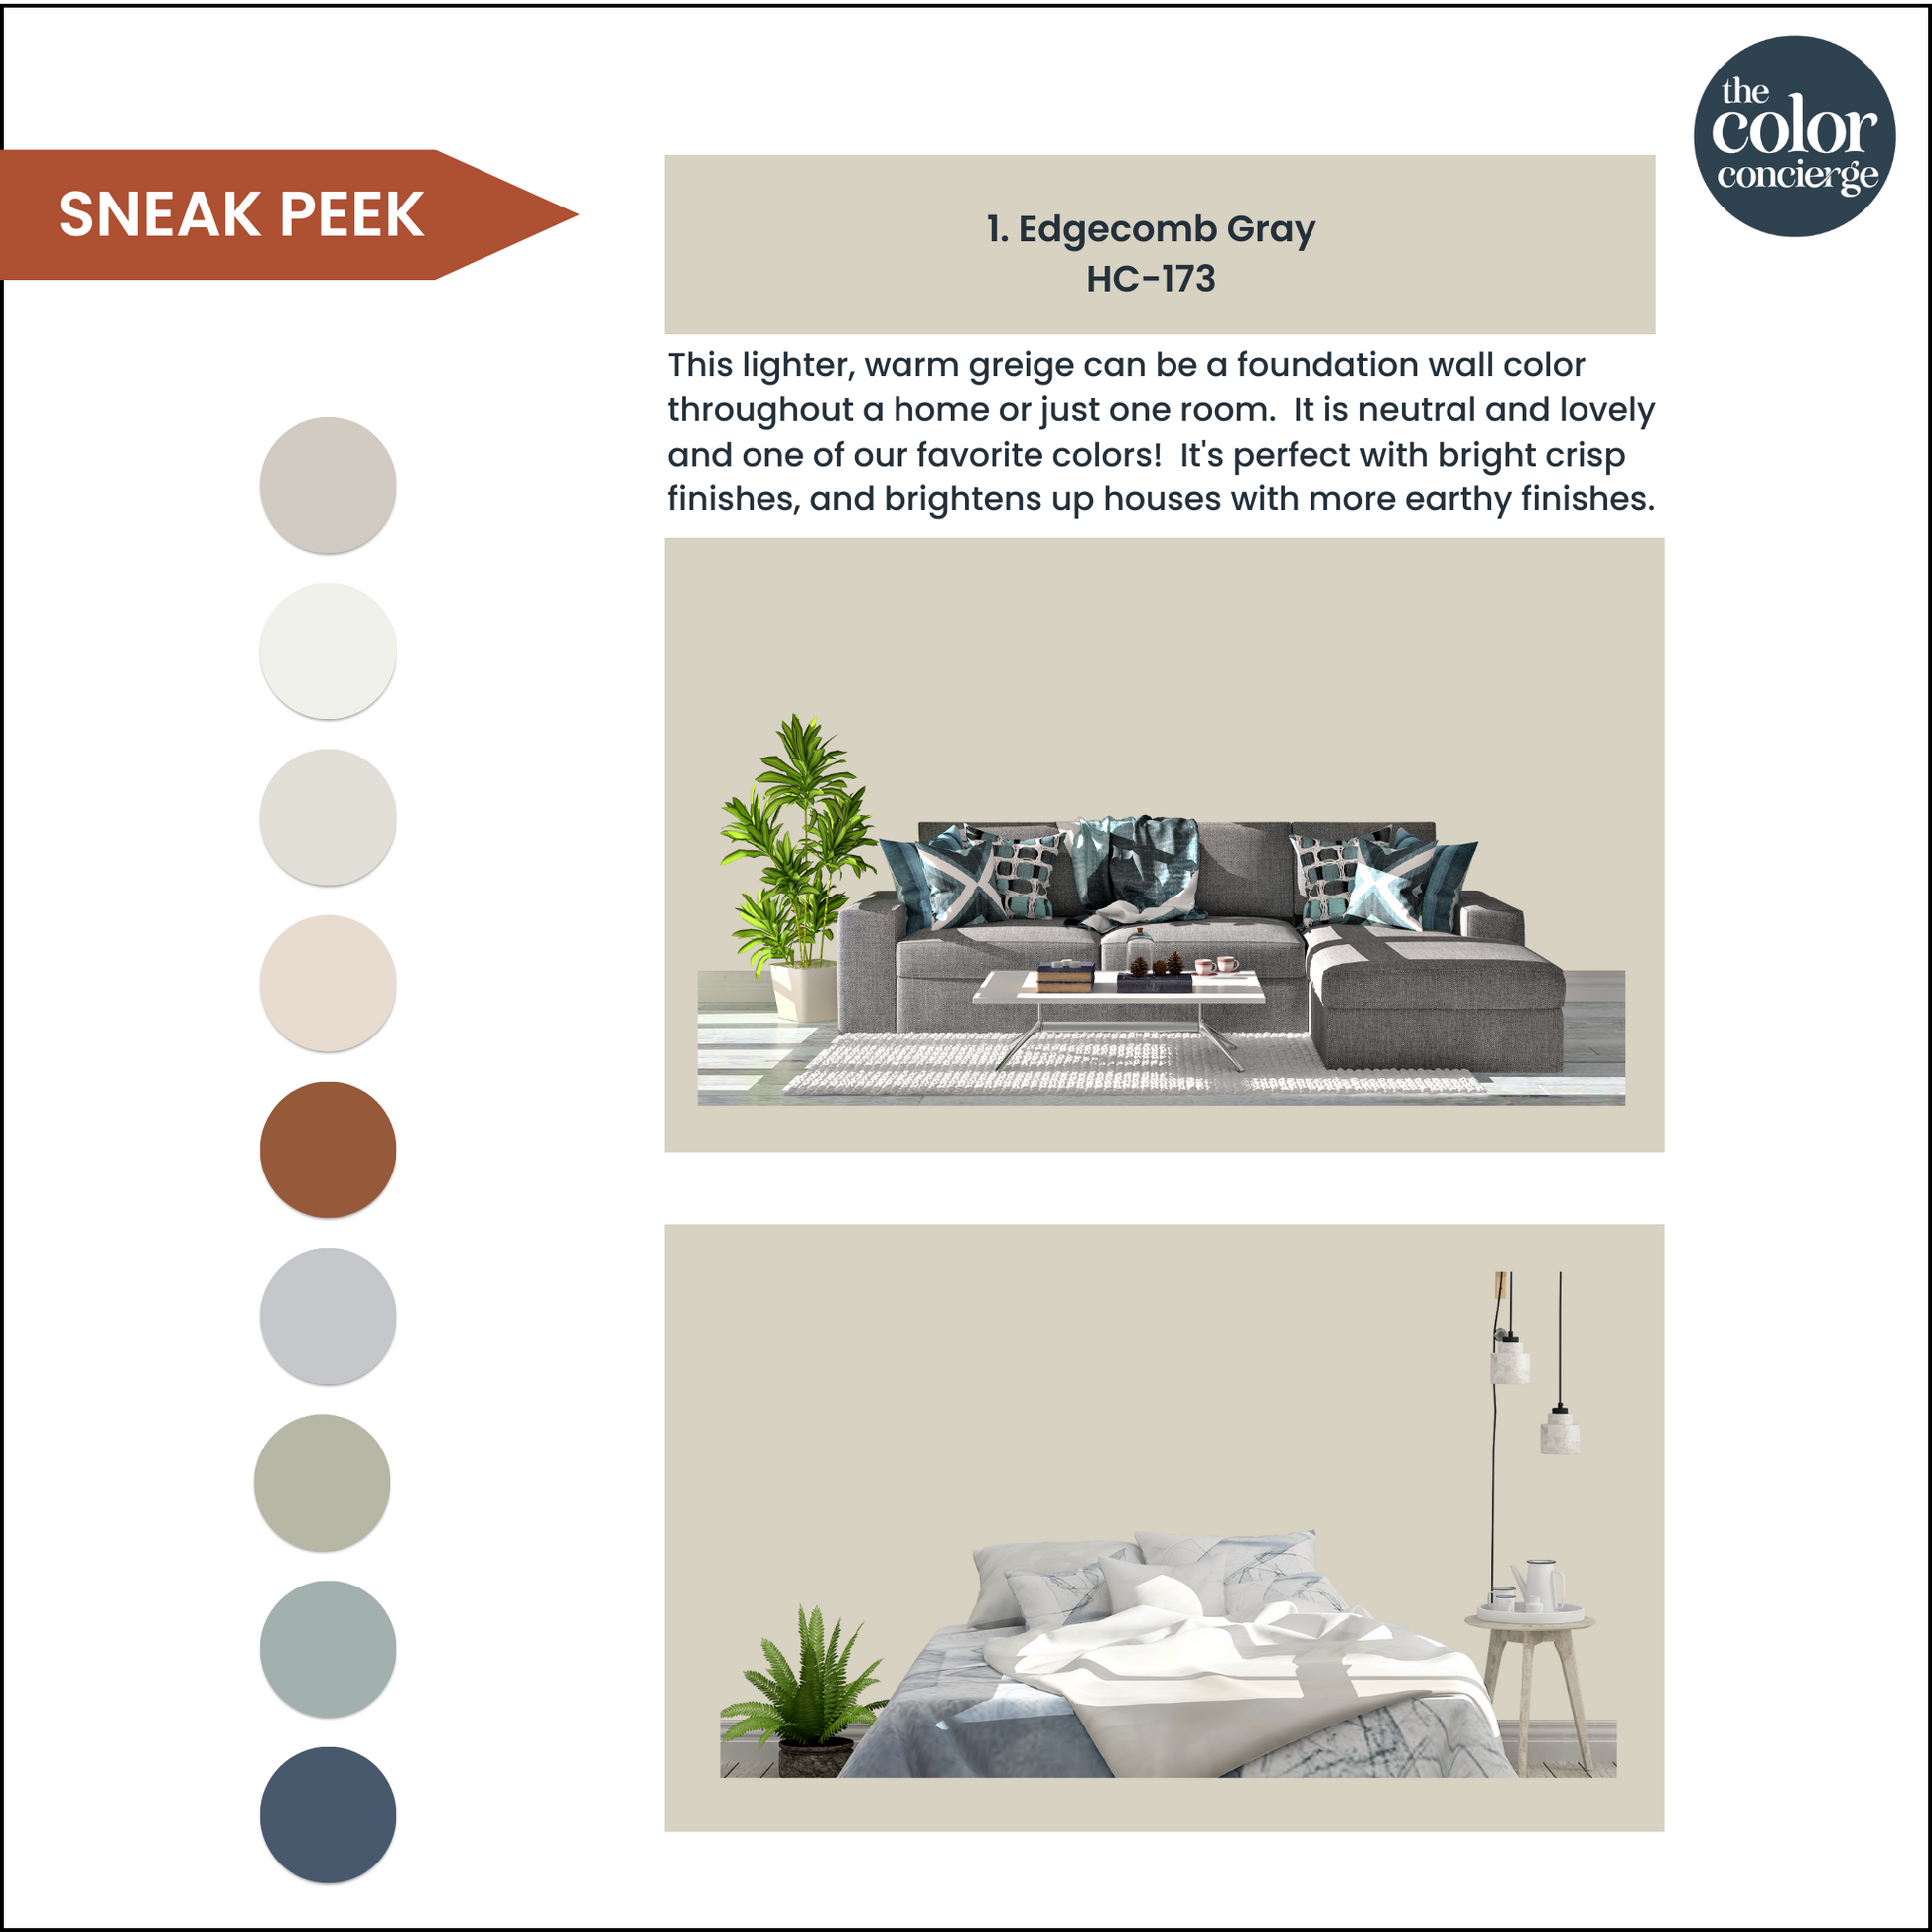 A page showing how to use a Benjamin Moore Edgecomb Gray color palette in your home